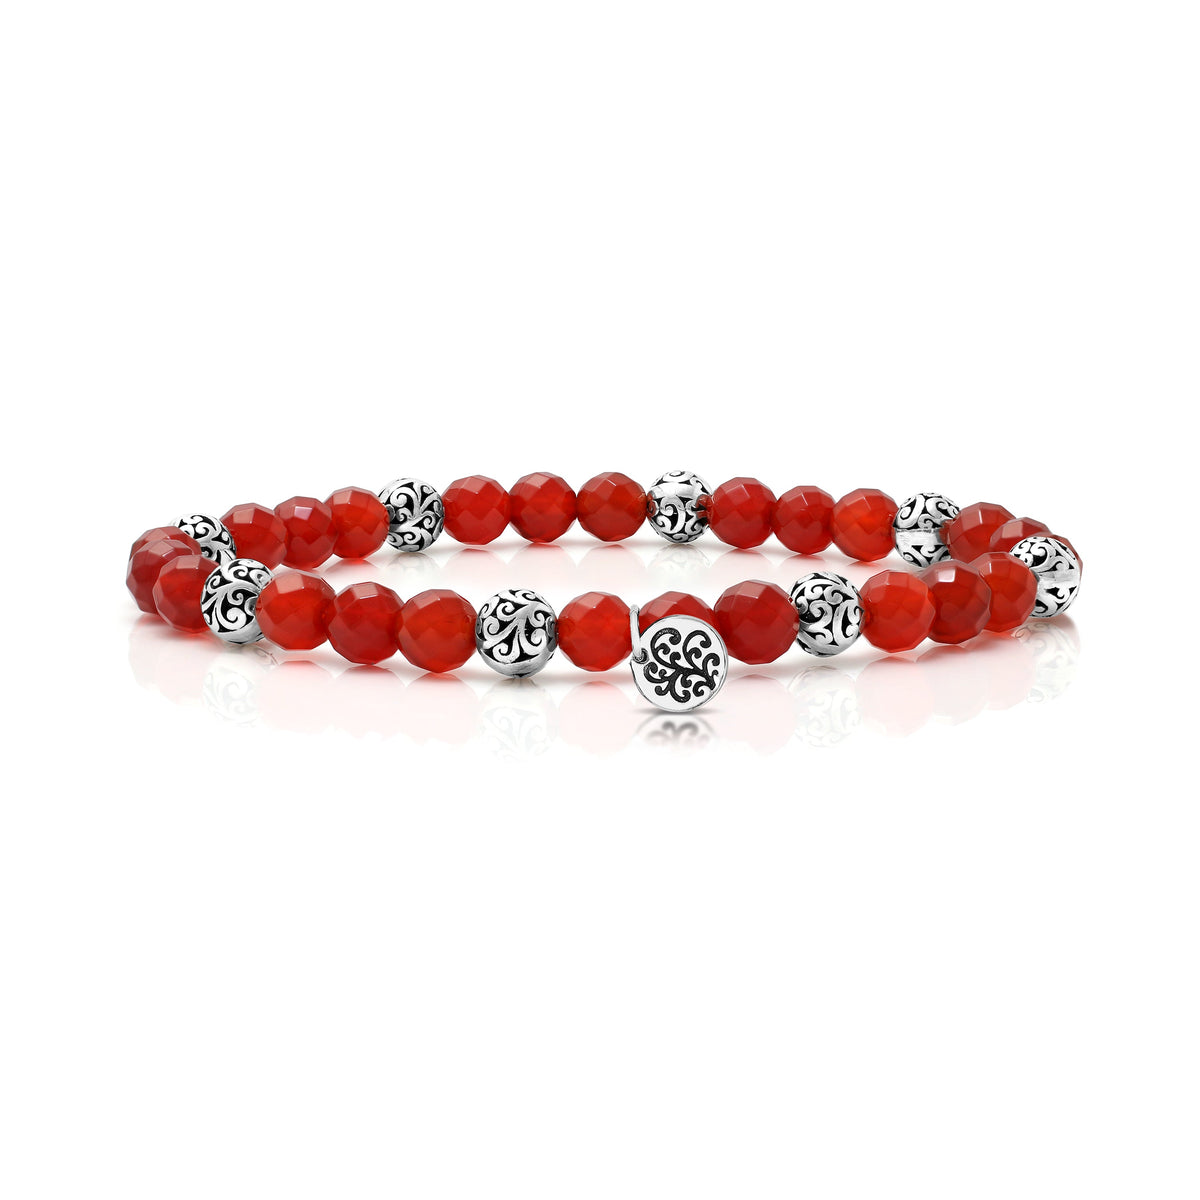 6 mm LH Signature Scroll and Red Carnelian Every Three Alternated Beads Stretch Bracelet